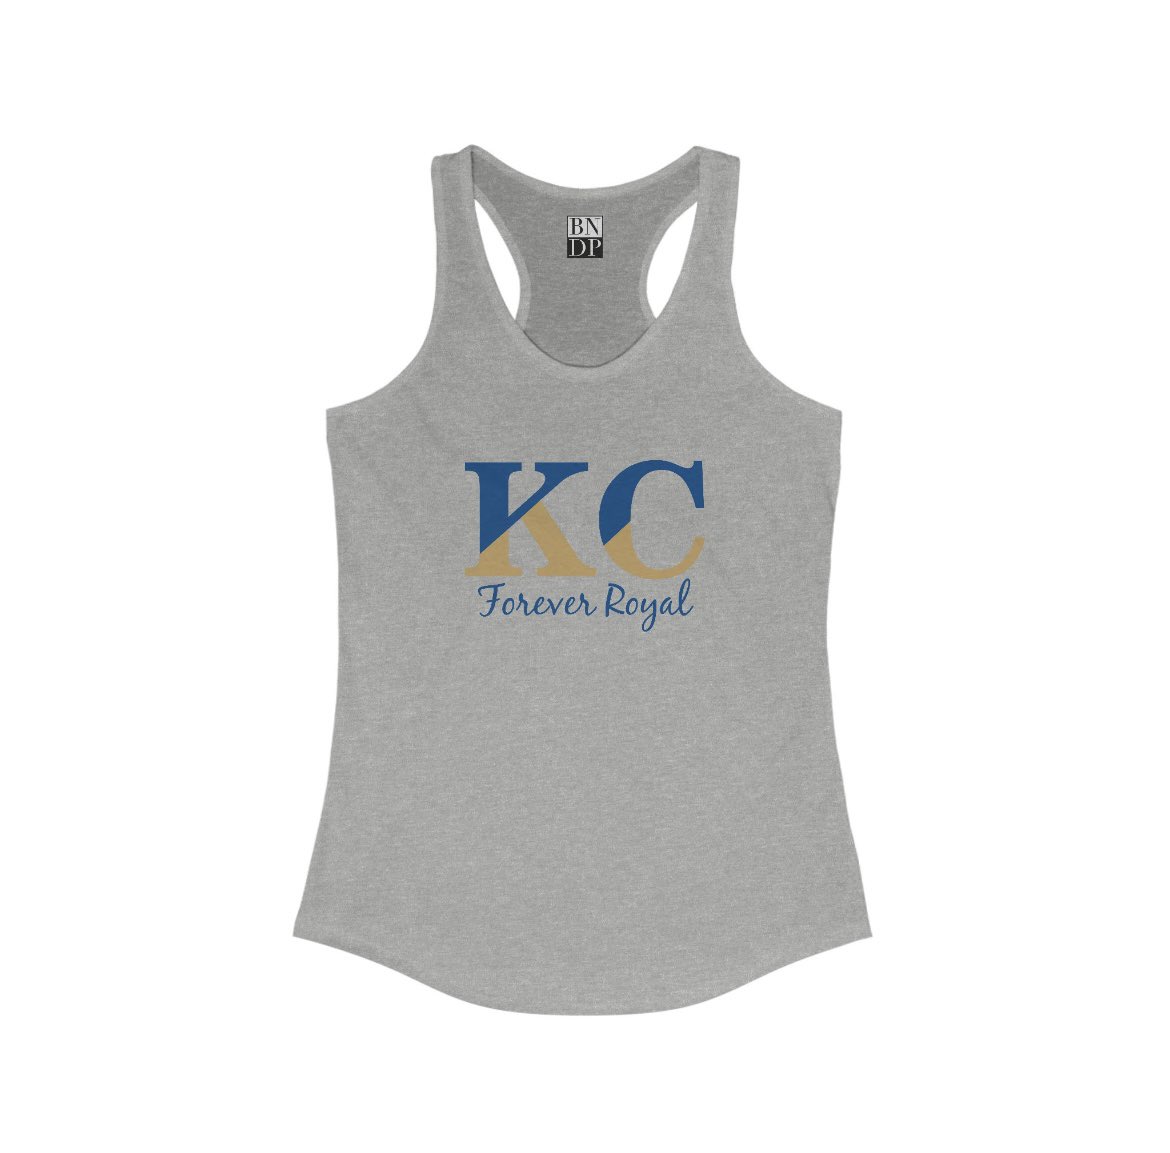 Have a woman in your life who is a KC Royals fan? This is the perfect gift idea!

Link: bndp.etsy.com/listing/152266…
.
.
.
#baseball #kc #kansascity #royals #royalsbaseball #sports #christmasgift #giftidea #kansas #business #holton #topeka #smallbusiness